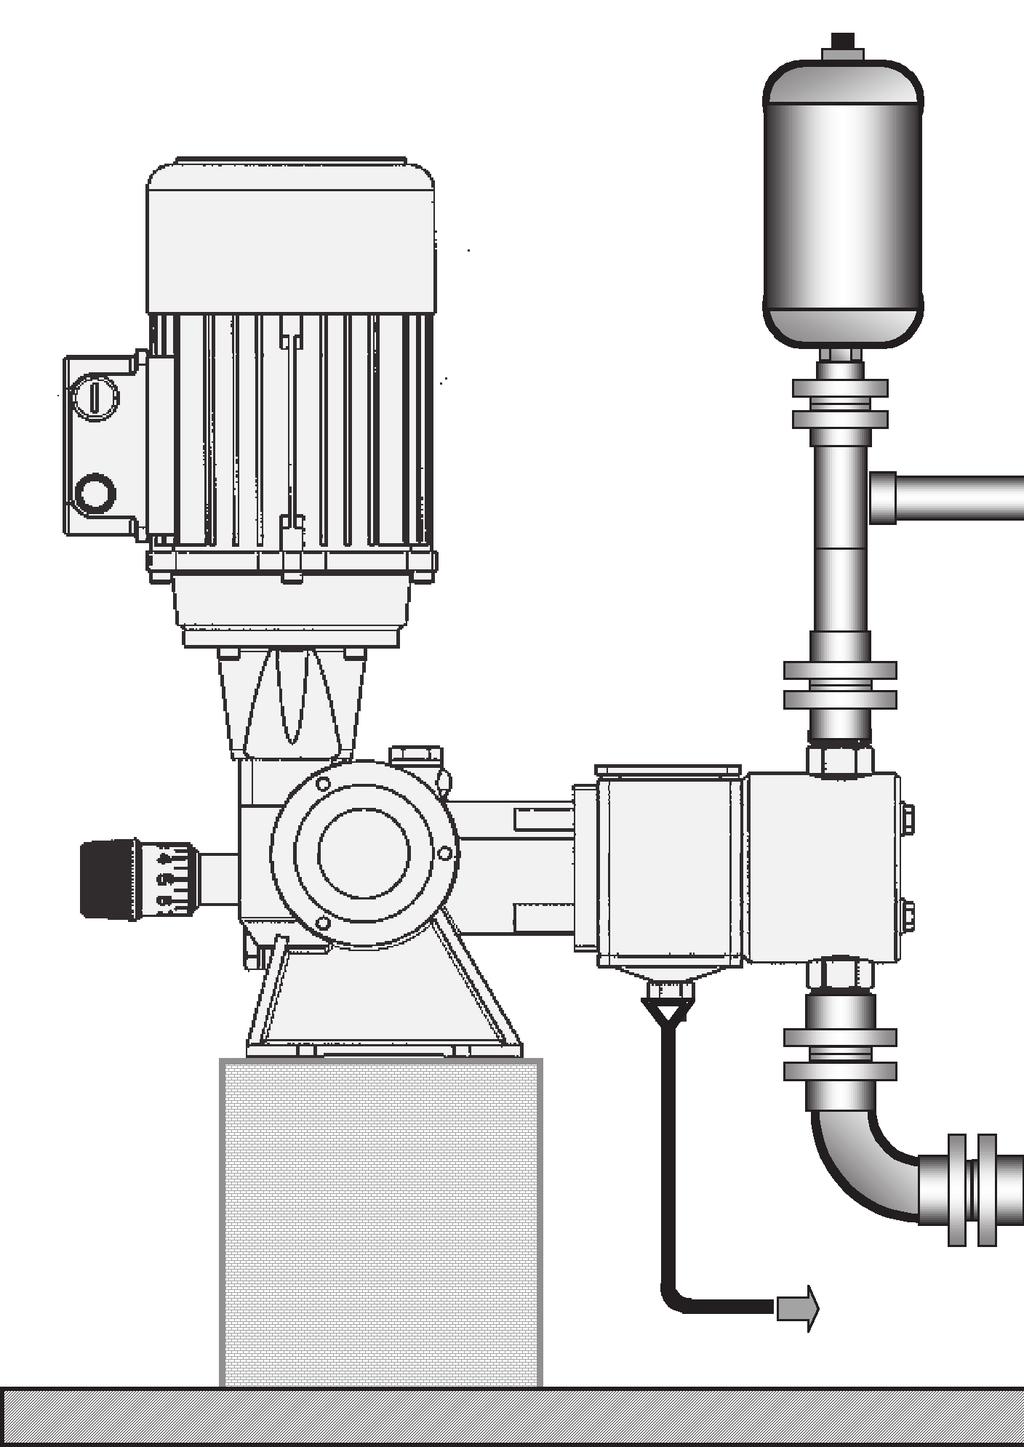 process systems. Uncontrolled fluid in motion can physically destrois. A pumping system including the pumping, valves, meters, back pressure valves, inline instrumentation and equipment. 1.